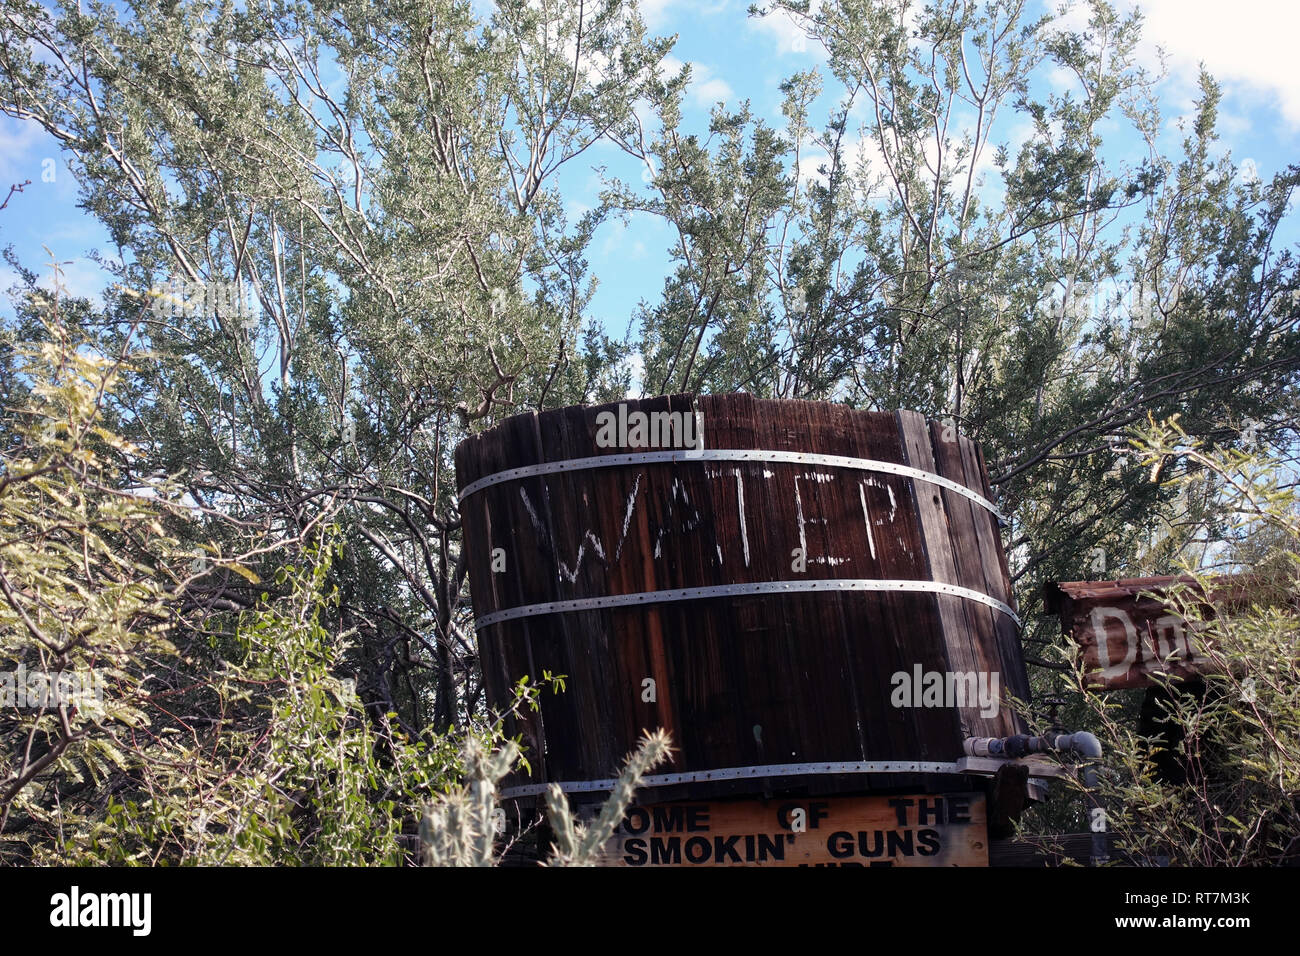 the water supply barrel for the old gold mining town of the Wild West, Tortilla Flats, Arizona. Stock Photo